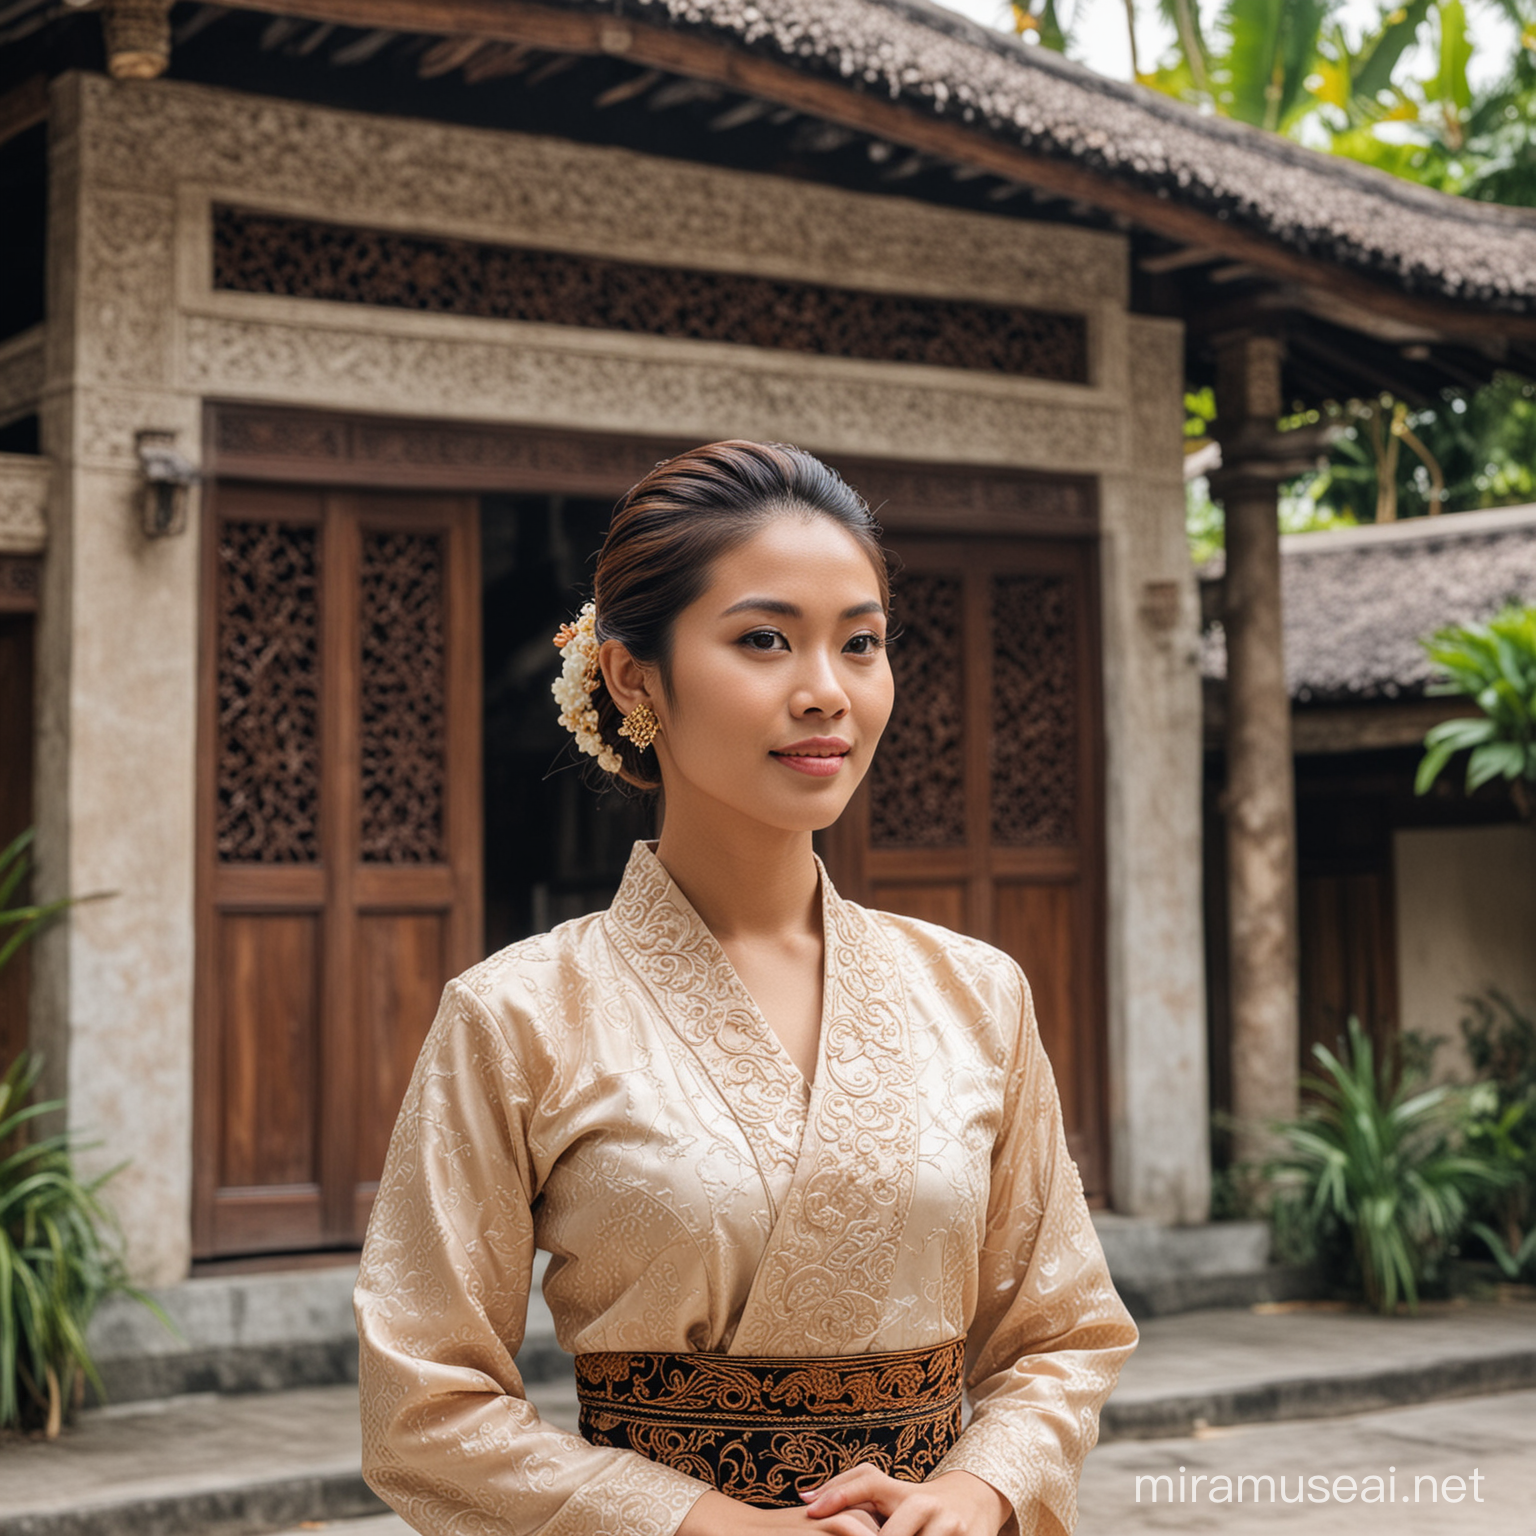 Balinese Woman in Traditional Attire Standing by Balinese House